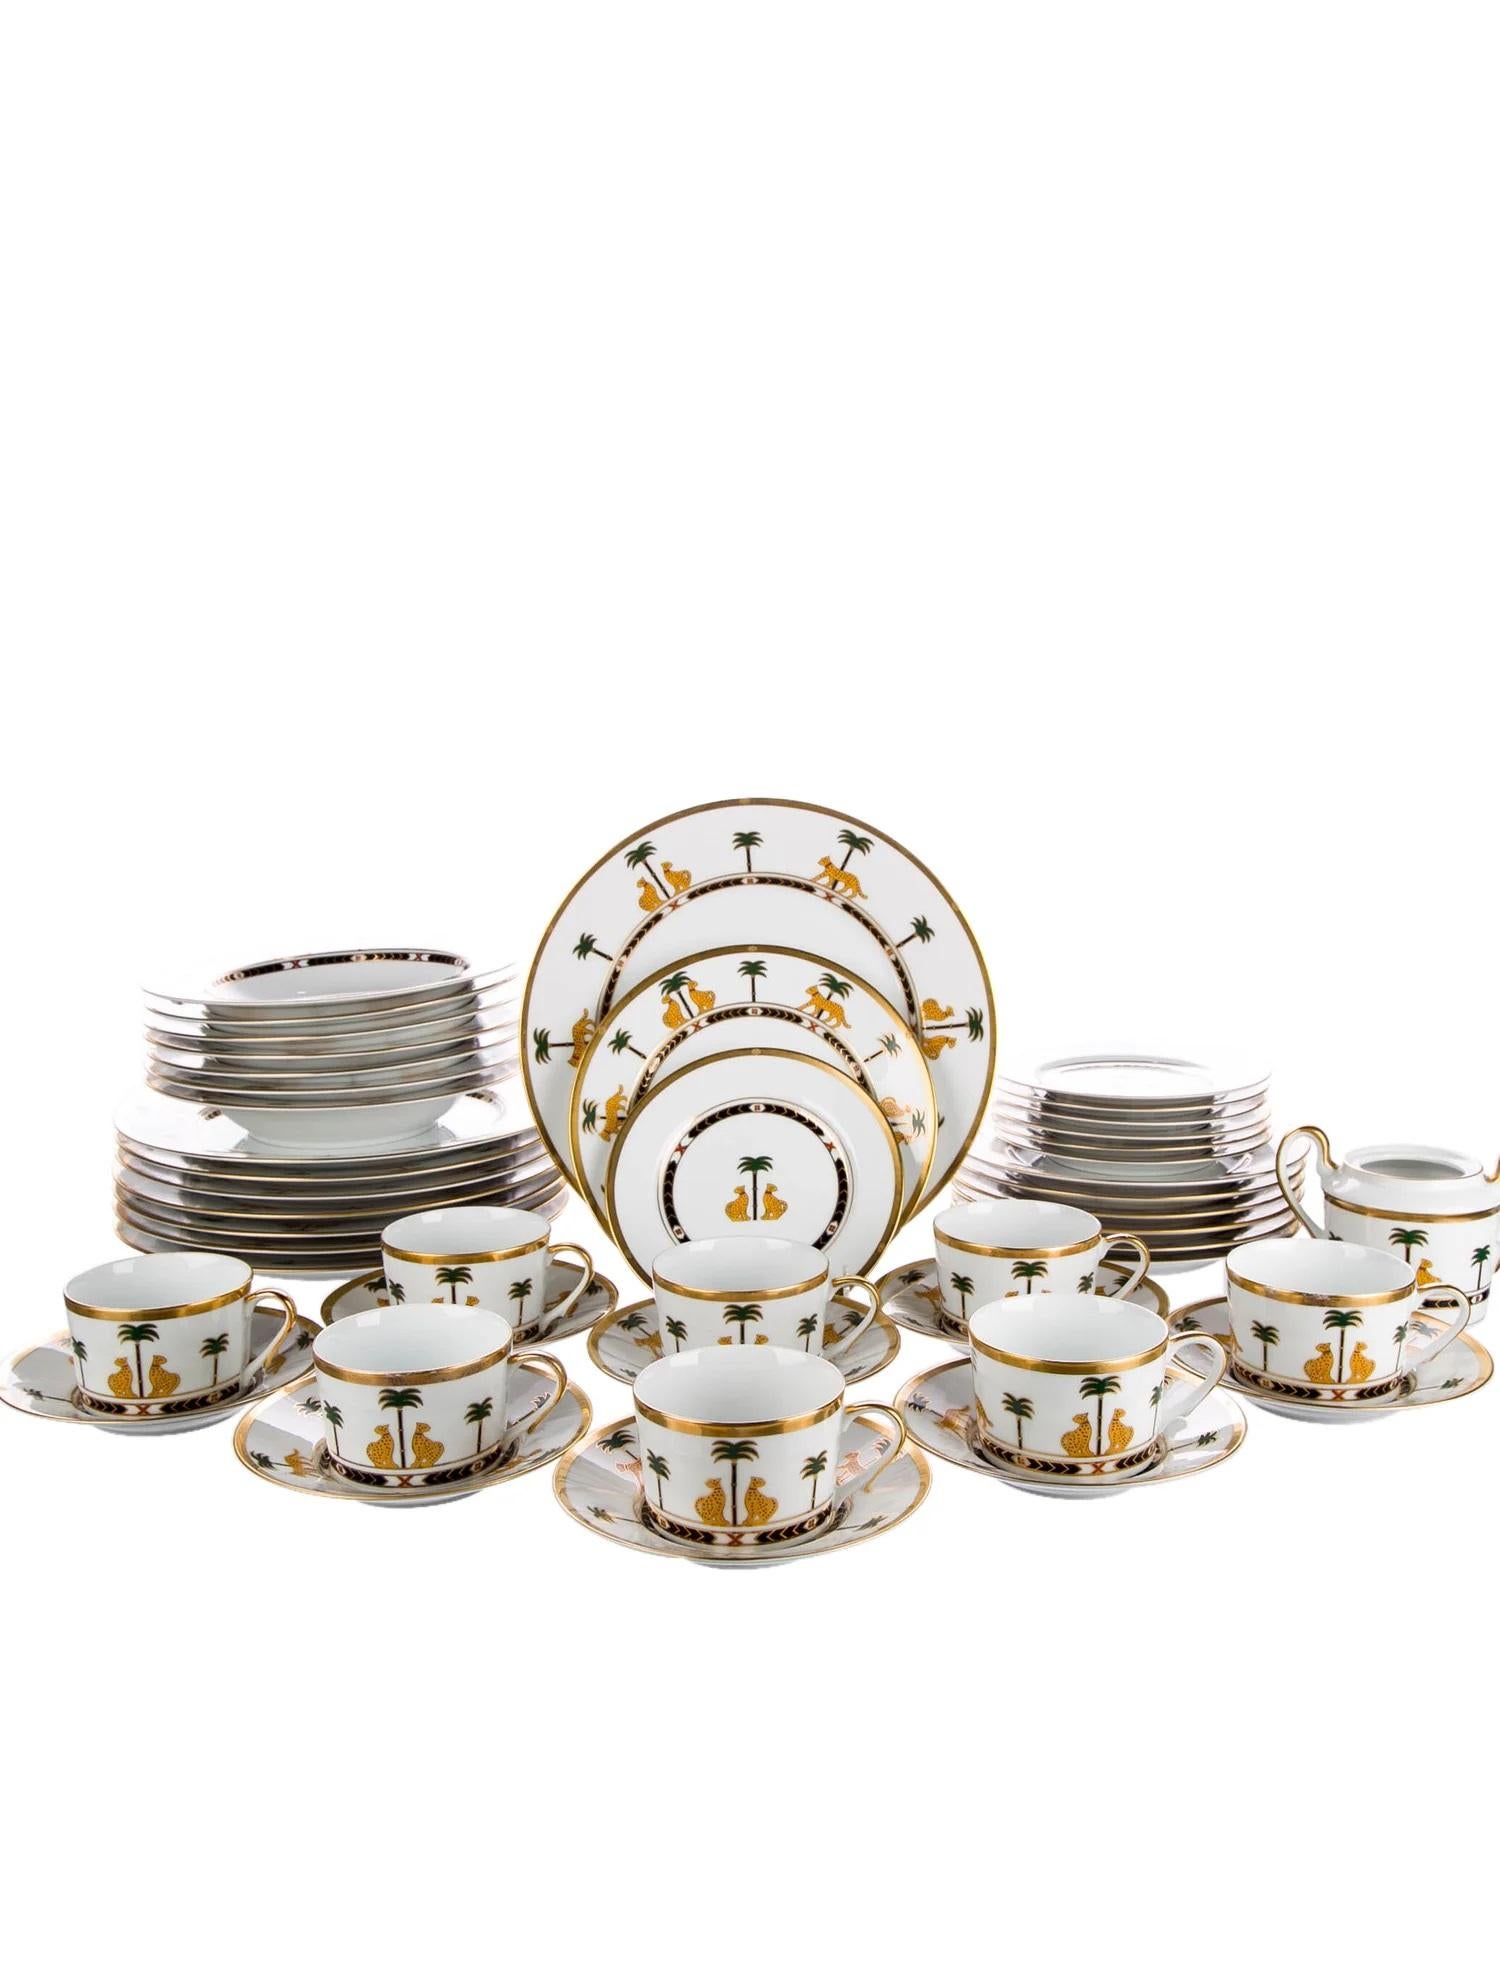 A set of four (4) place settings (16 total pieces) in the signature Casablanca pattern by Christian Dior.

Features a white, gold and multicolor pattern with panther and palm tree motifs throughout, gilt accents throughout and brand stamp at